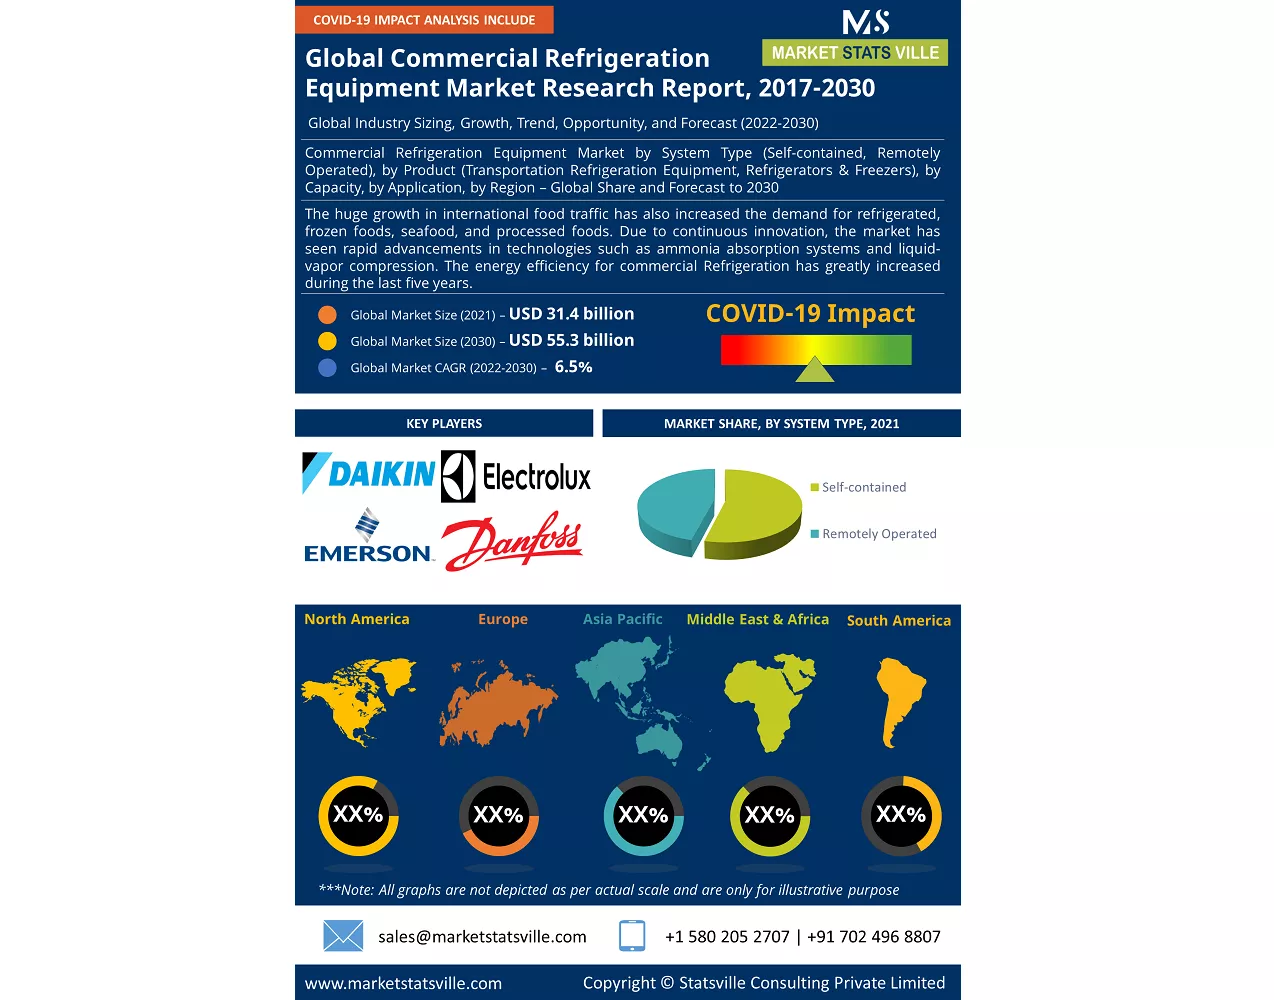 Commercial Refrigeration Equipment Market to reach USD 55.3 billion by 2030